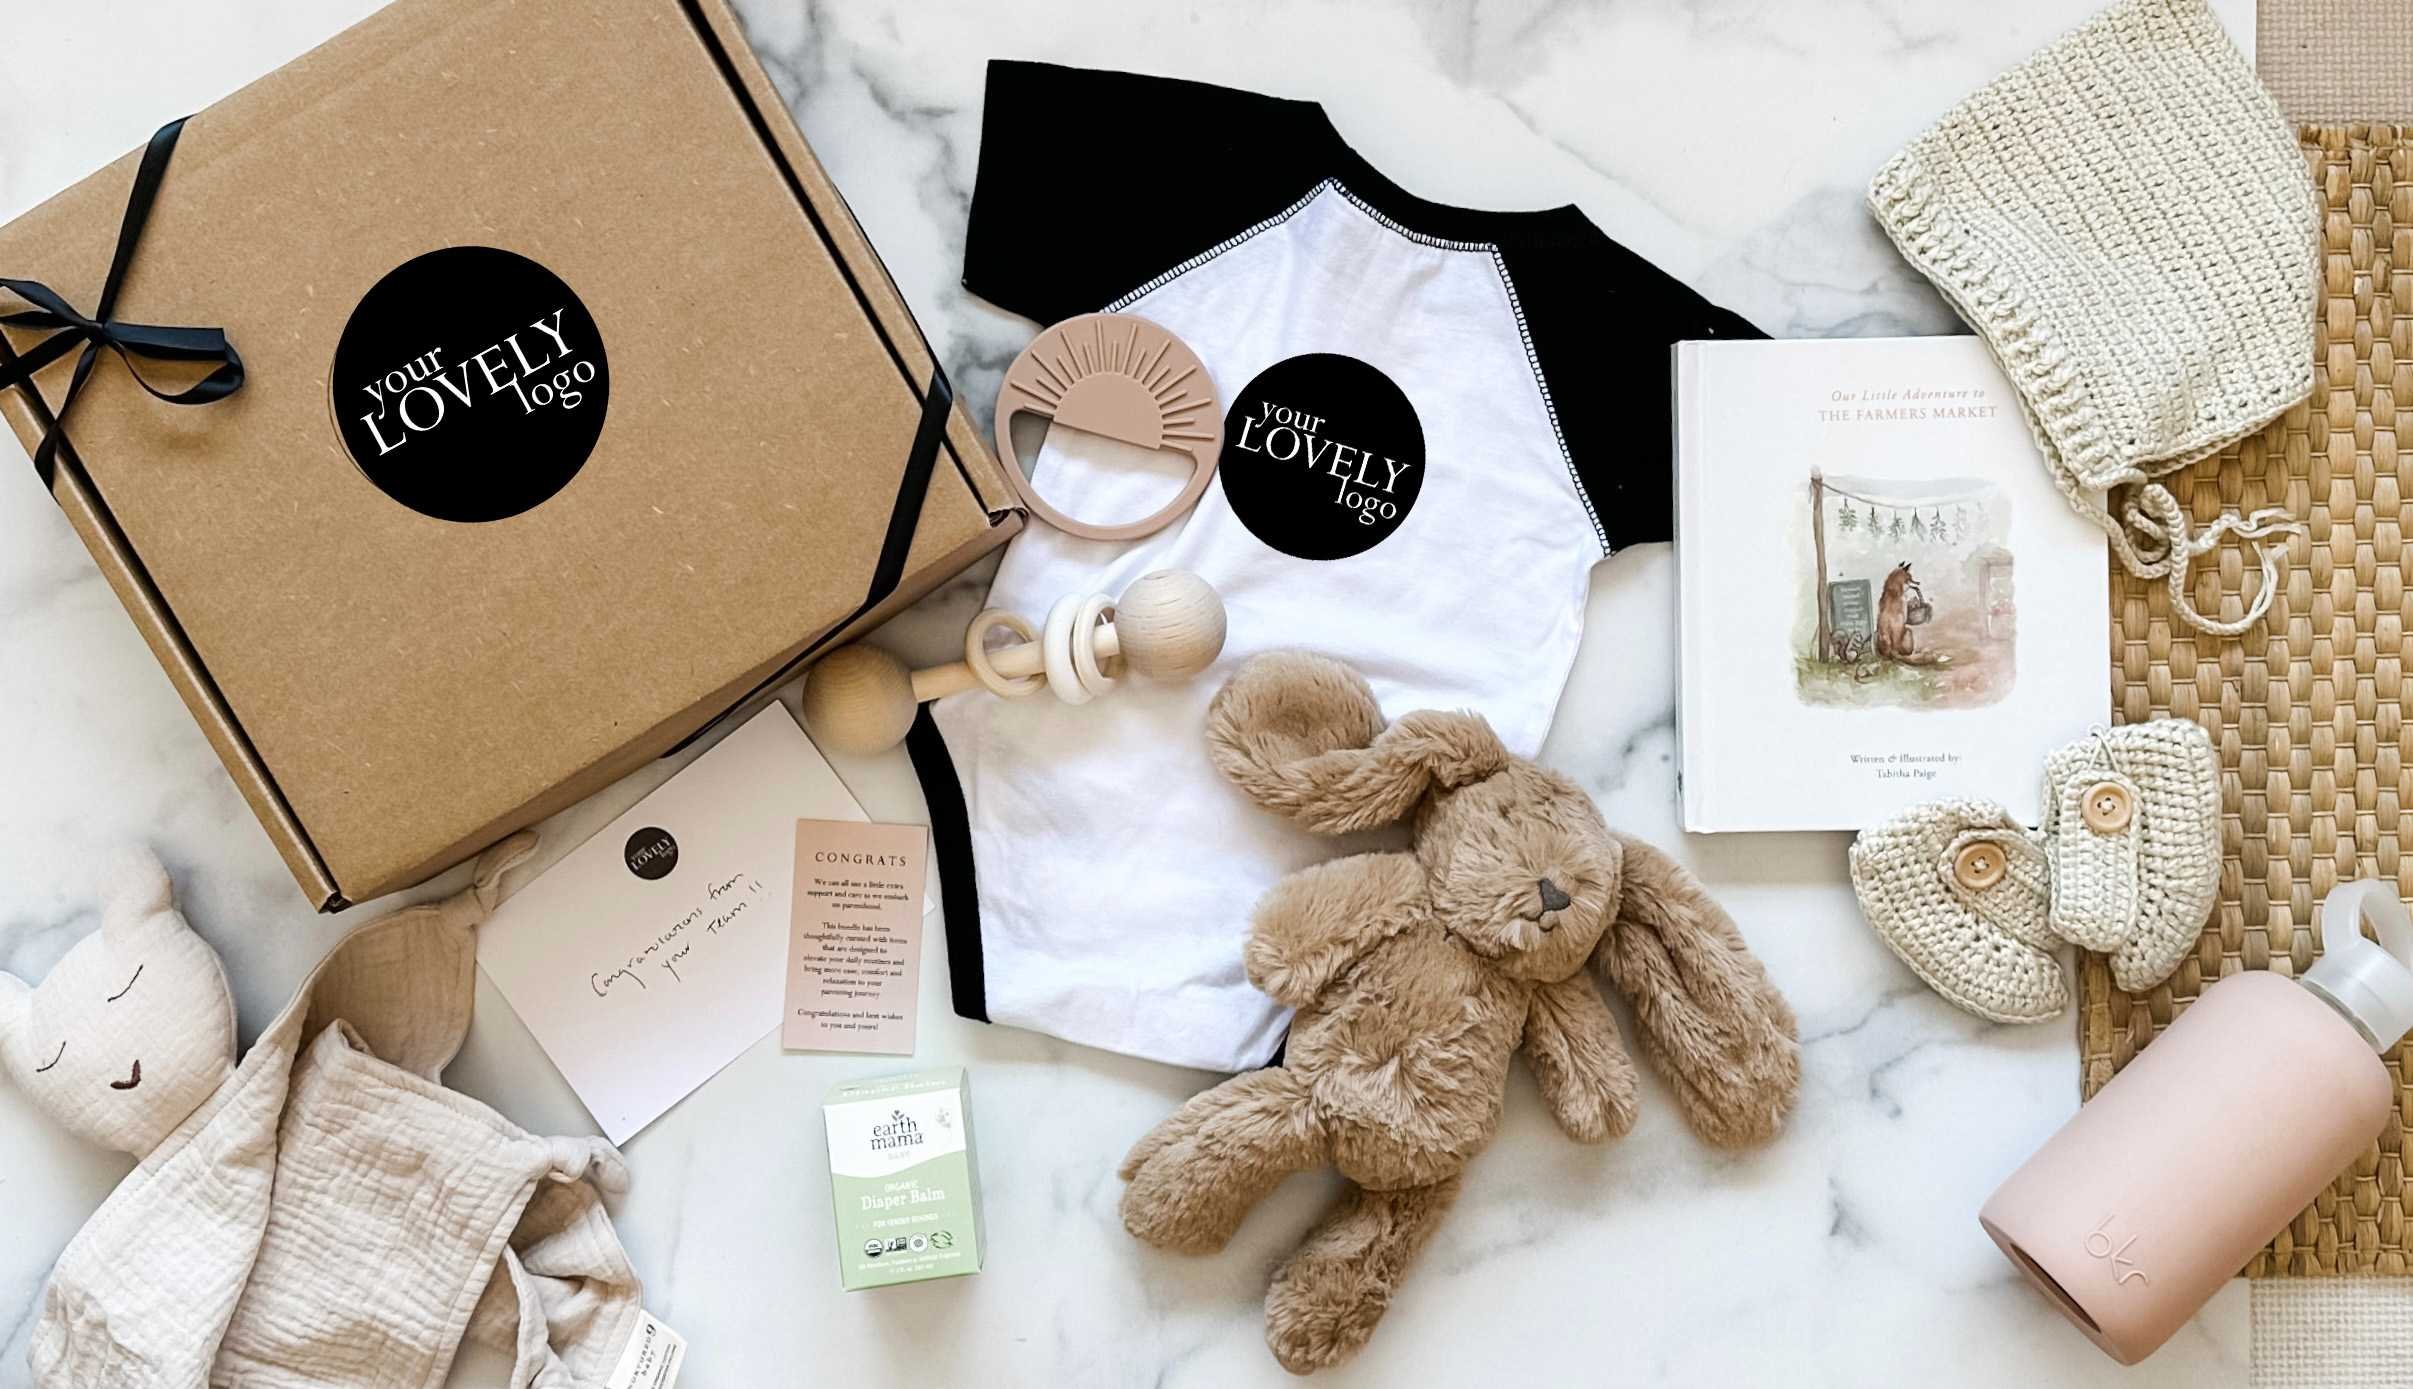 Maternity Leave Gift Ideas for Coworkers & Employees